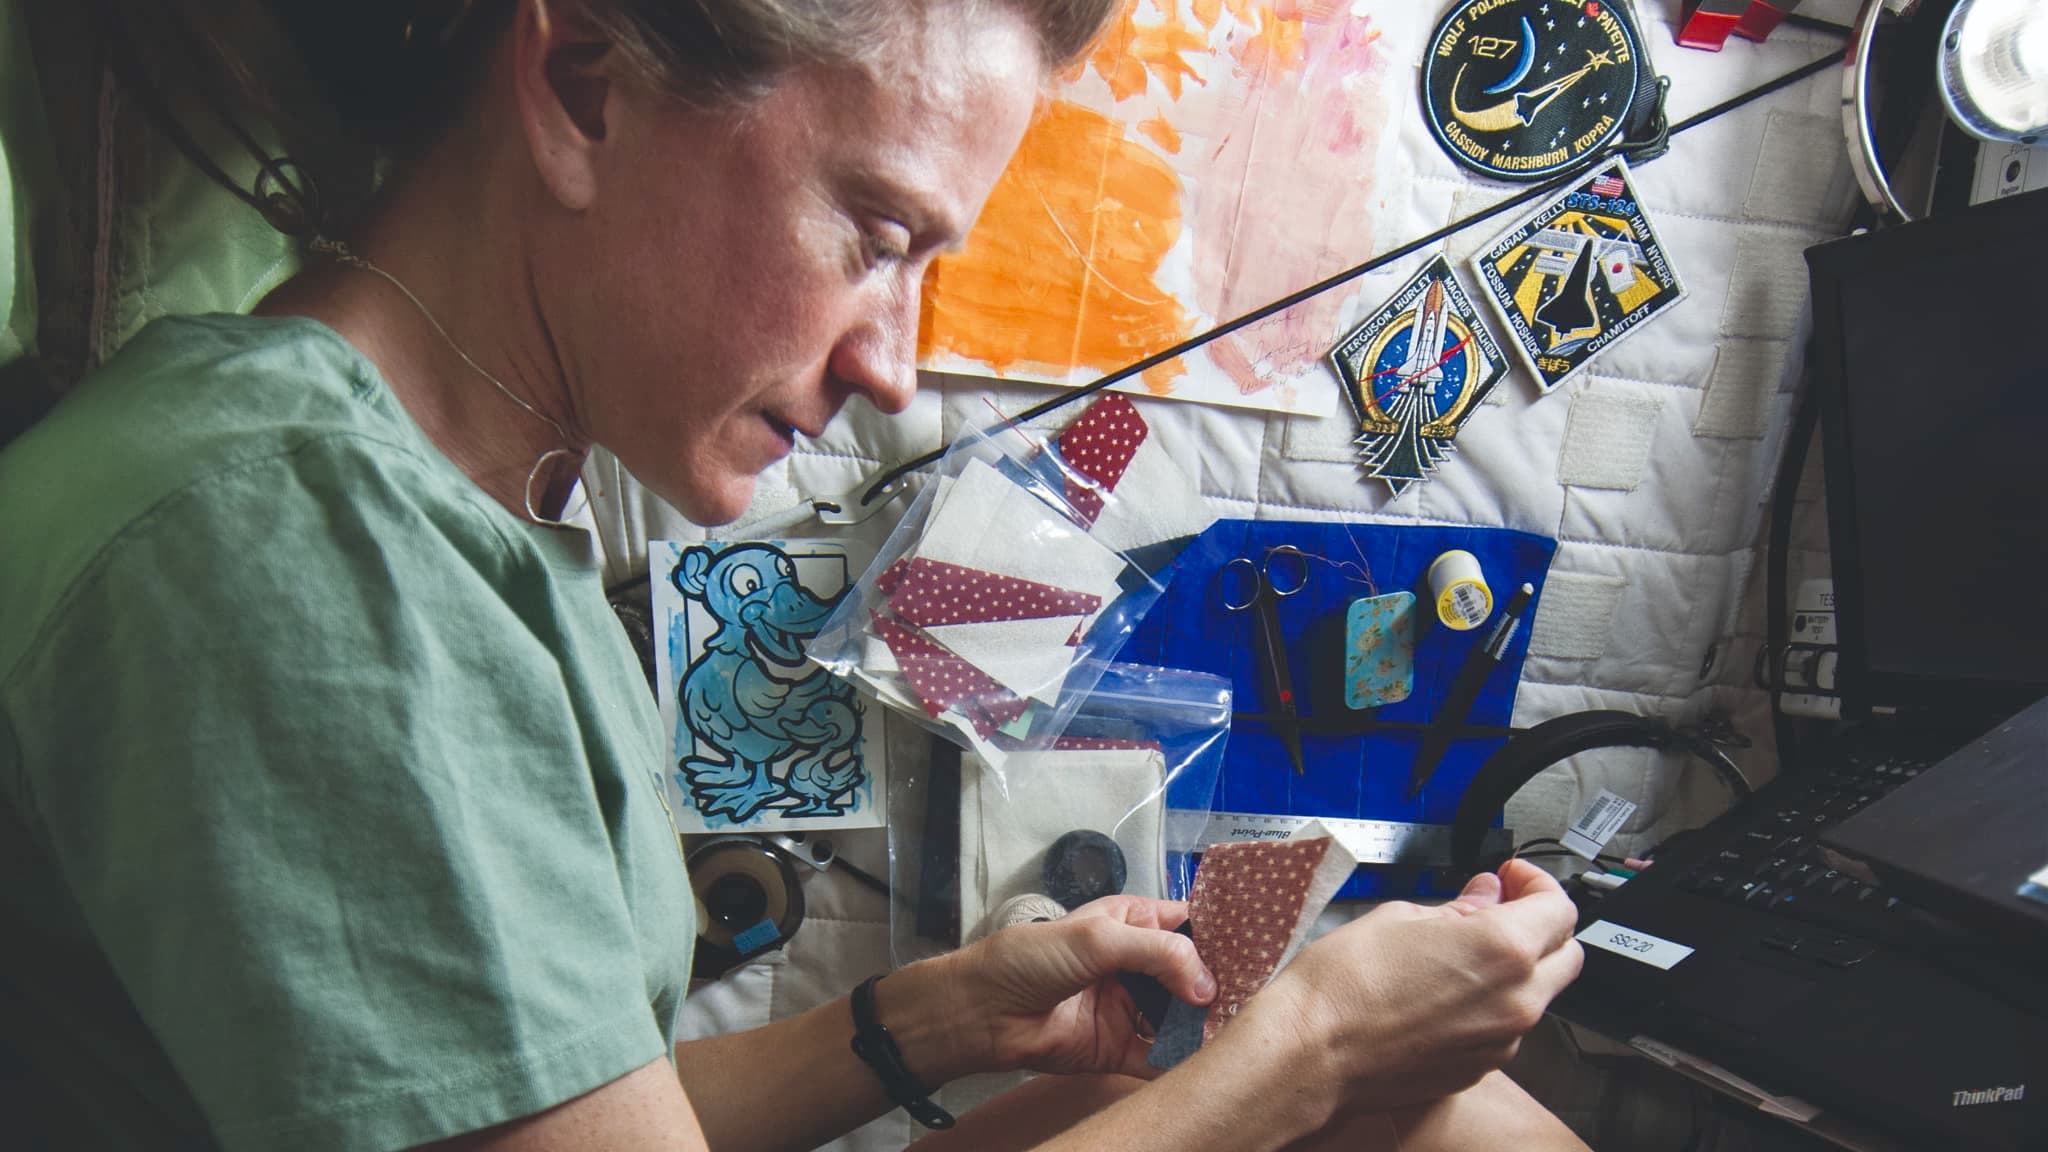 Karen Nyberg sewing on the International Space Station, Craft in America